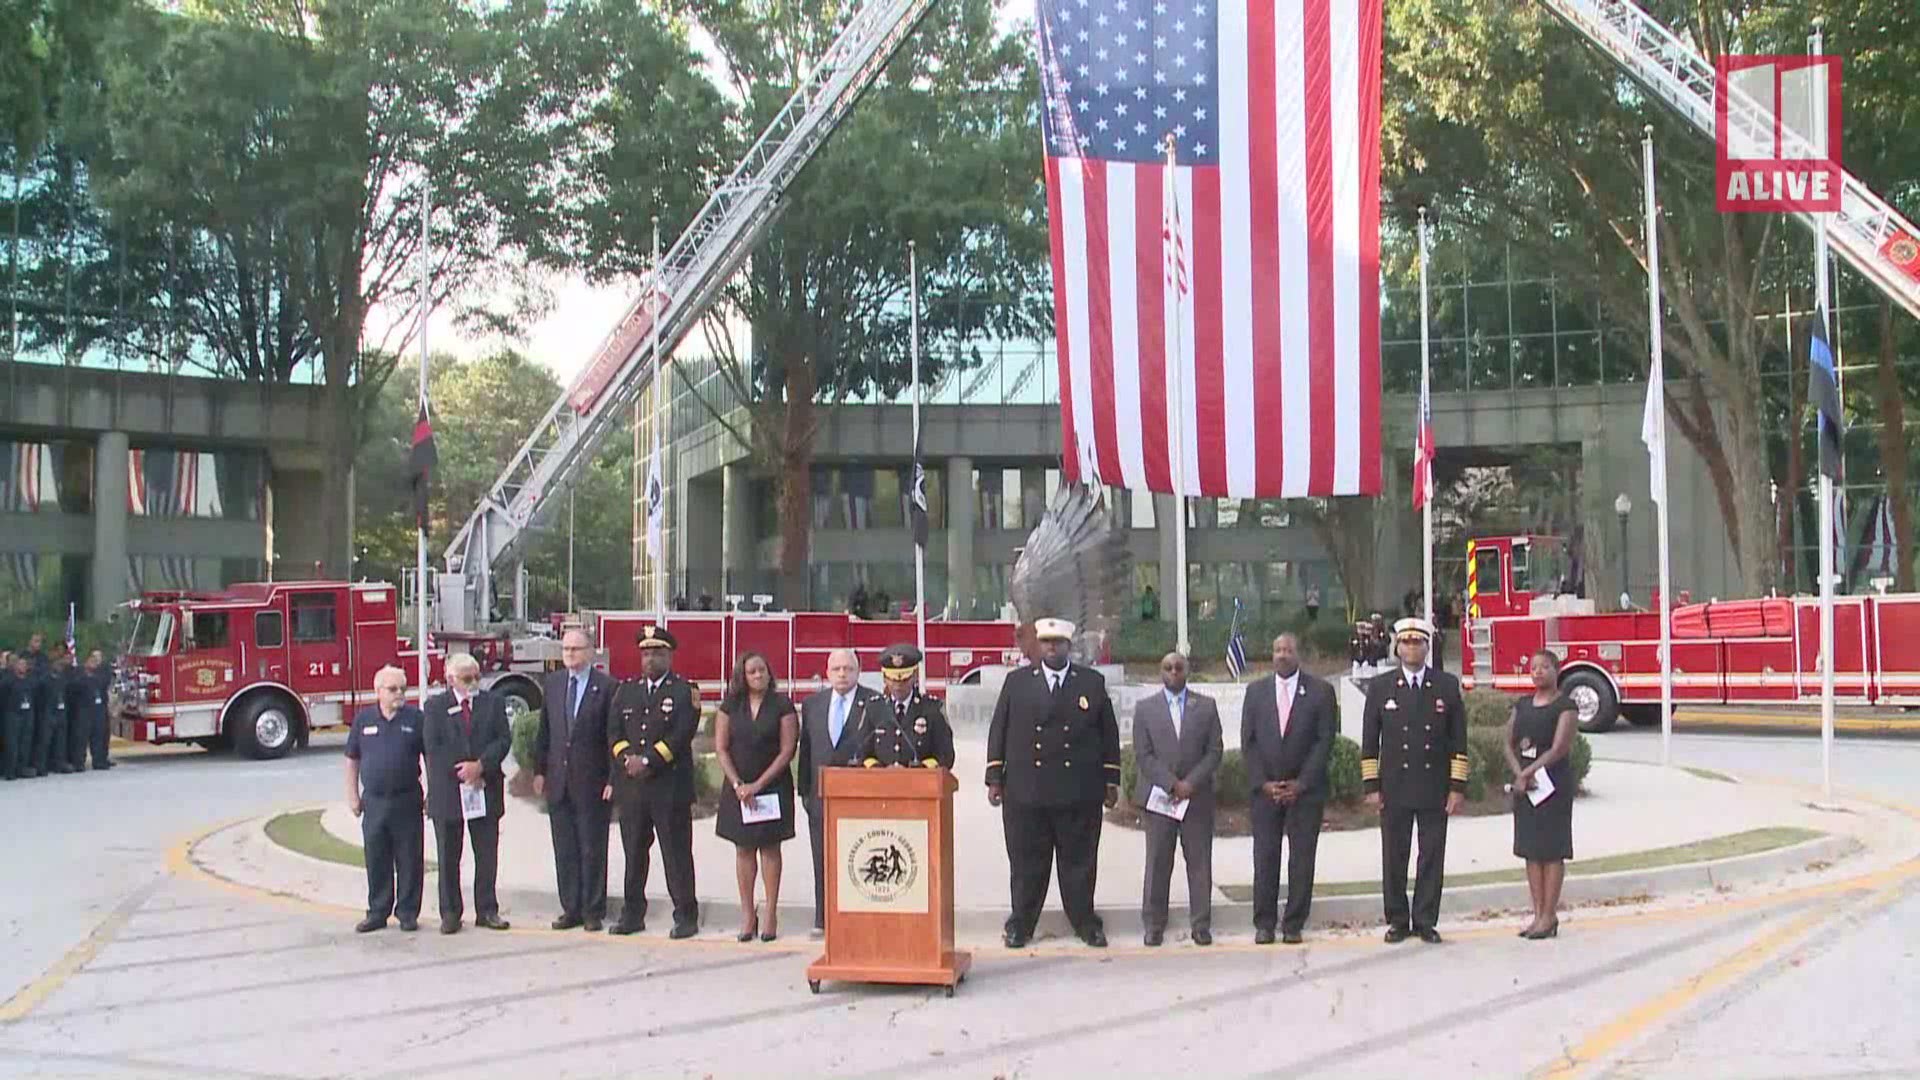 The ceremony was held at the DeKalb County Police headquarters on Wednesday.